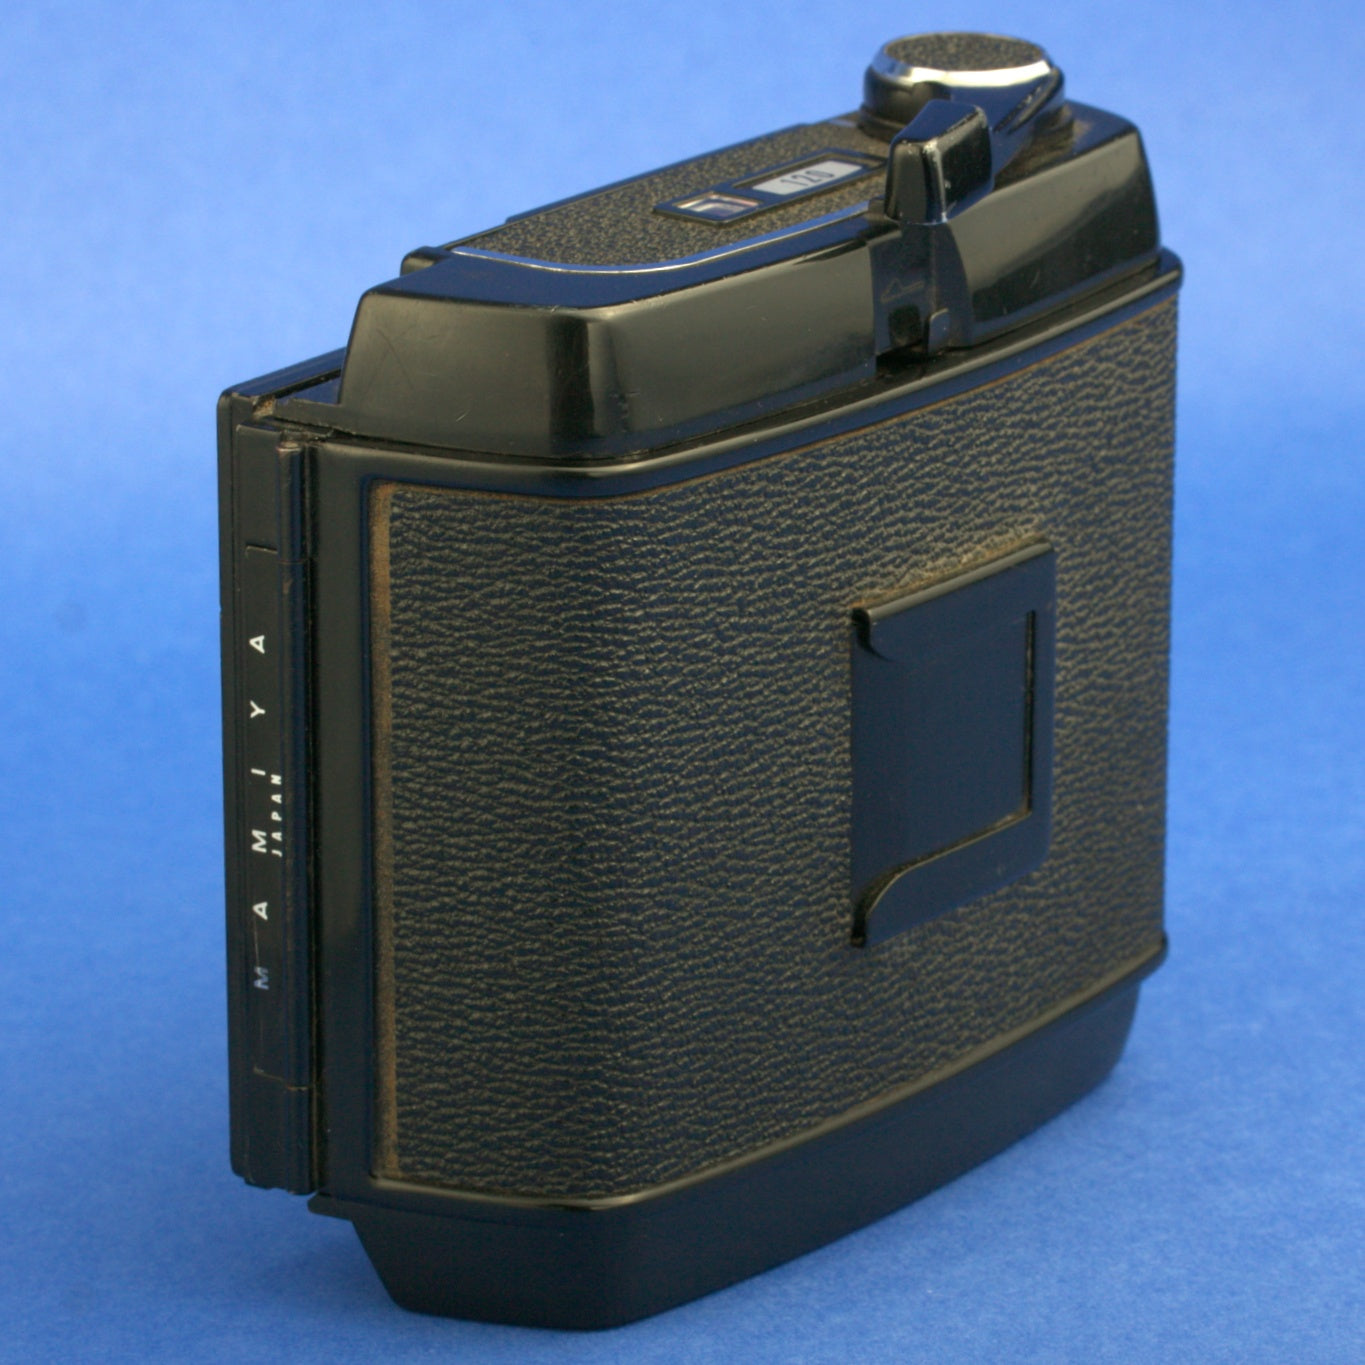 Mamiya RB67 120 Back with Insert Not Working